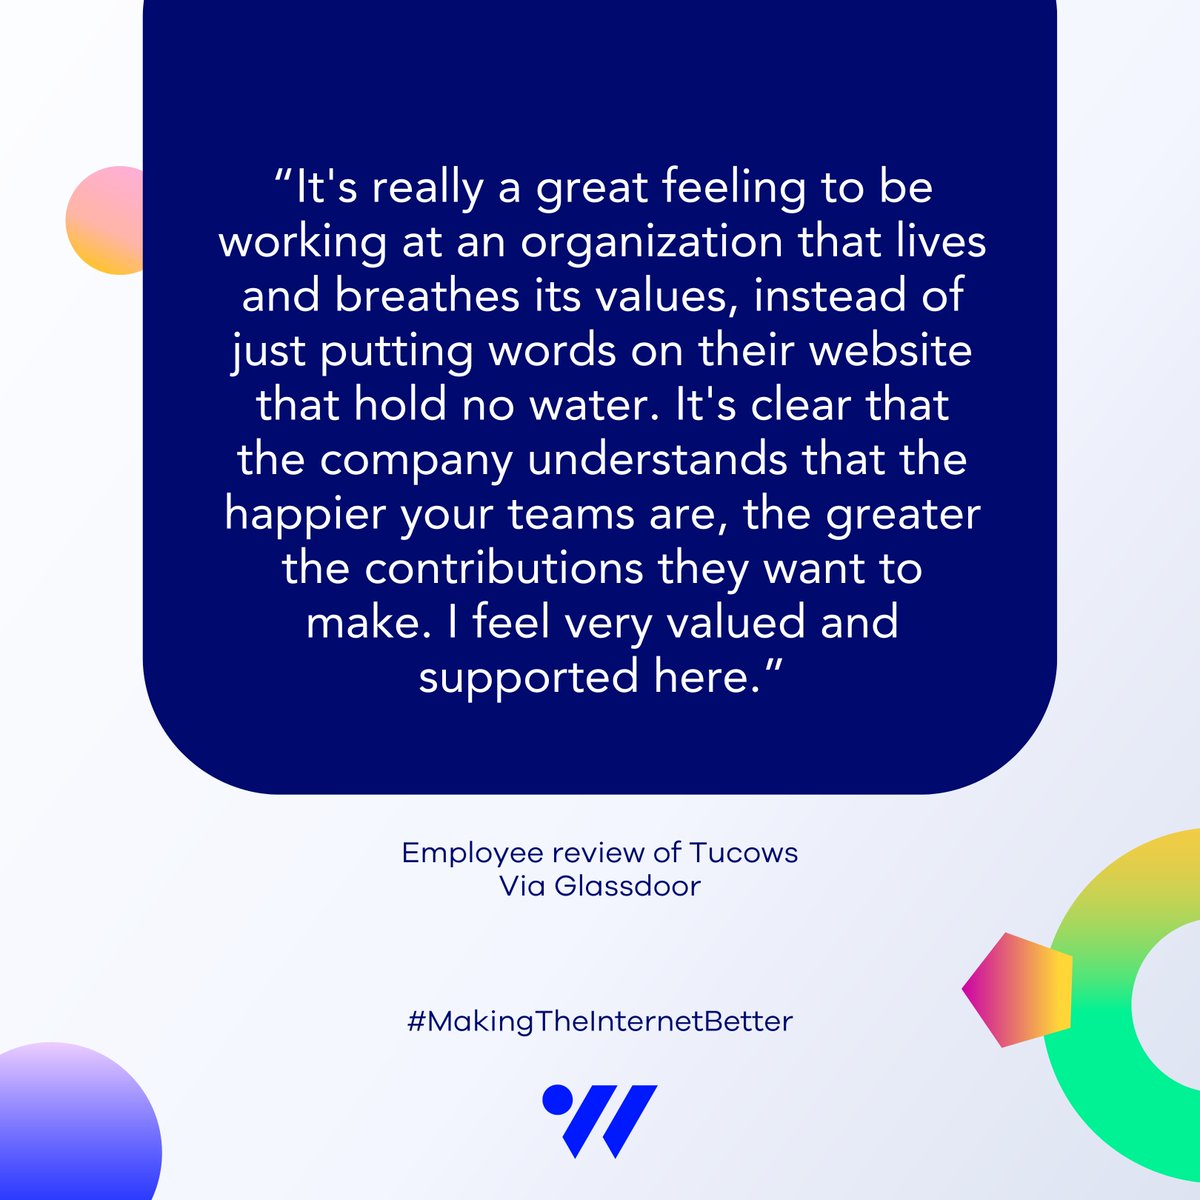 At Tucows, we bring our whole selves to work. It’s reviews like this that remind us how impactful an authentic and inclusive culture really is when it comes to happiness in the workplace. Review shared verbatim (please excuse spelling and grammar). #GlassdoorReviews